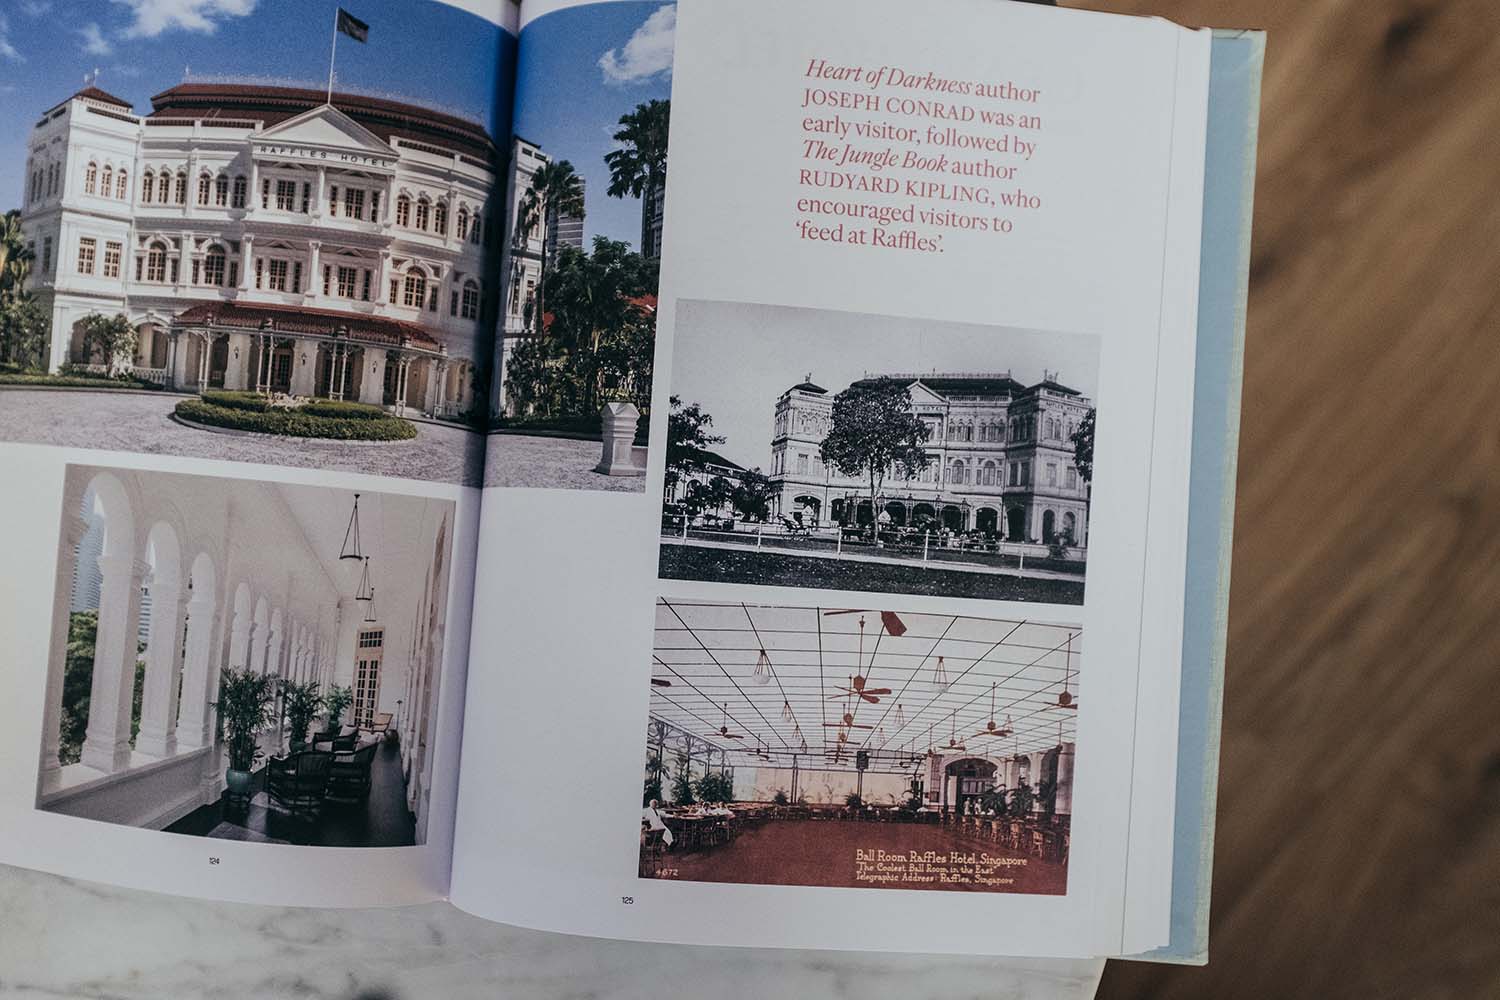 Grand Hotels of the World by Luster Publishing